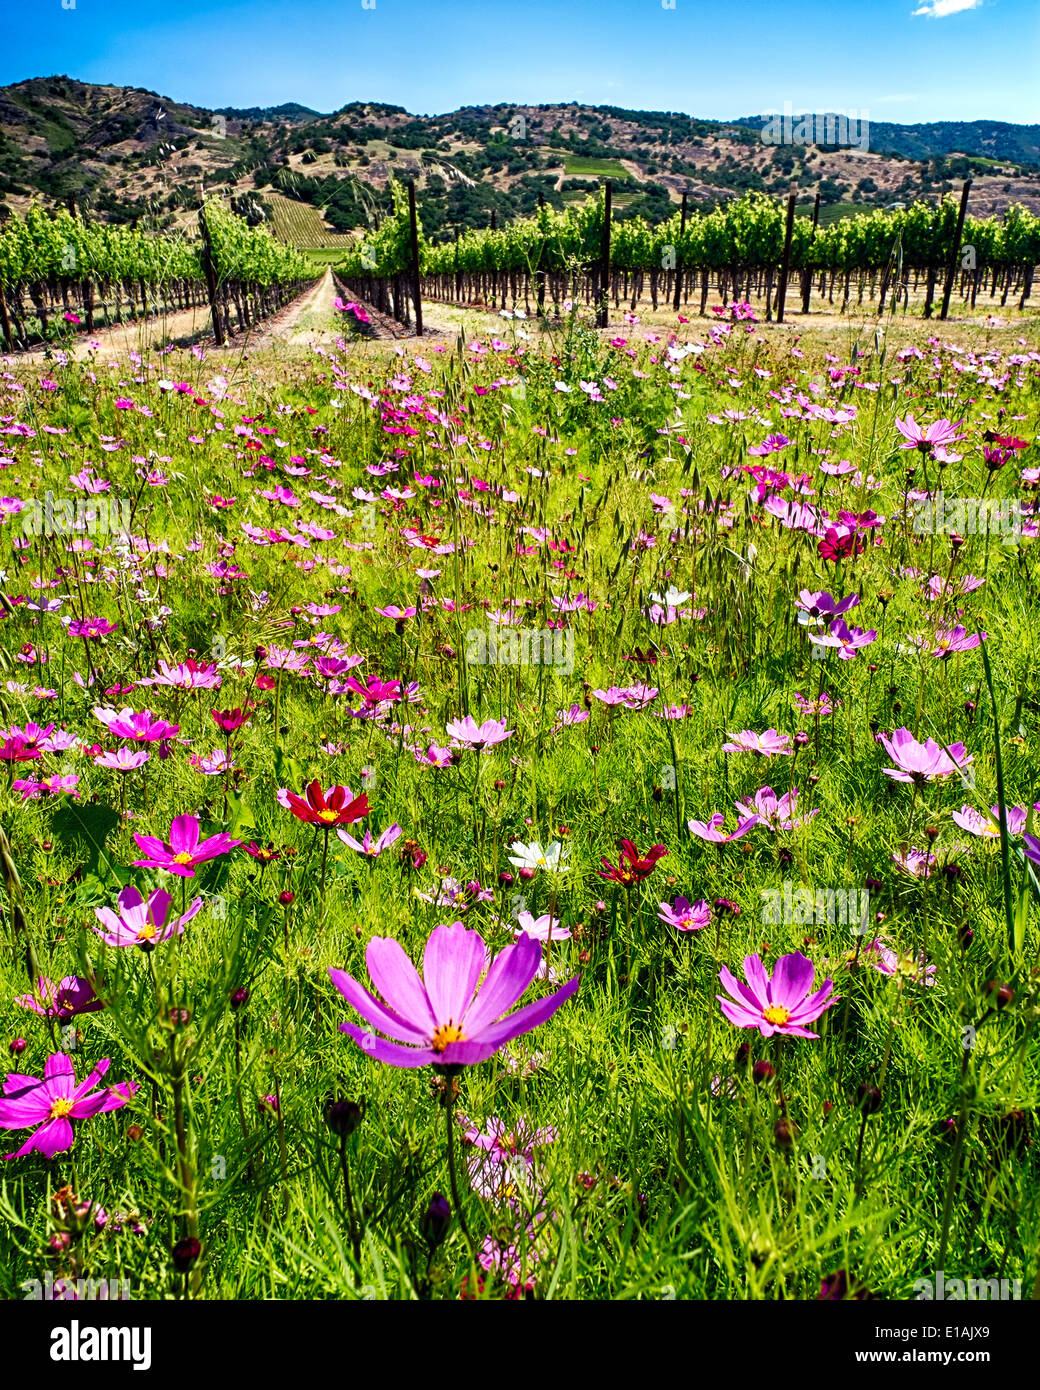 Spring Wildflowers and Row of Grapevines, Napa Valley, California Stock Photo